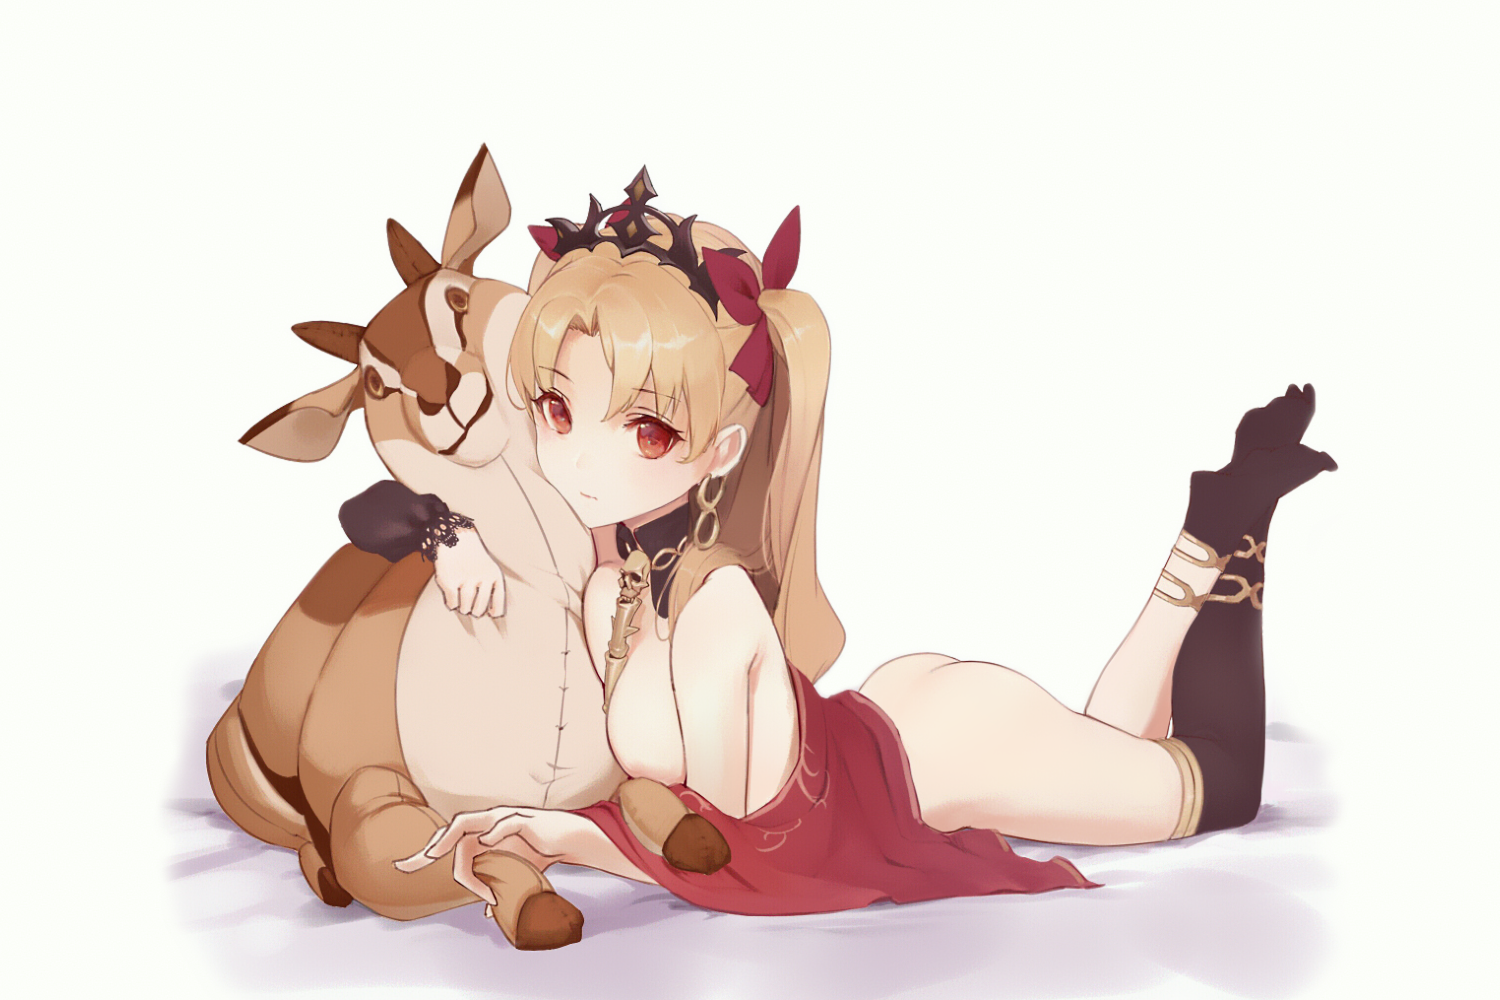 Anime 1500x1000 Ereshkigal (Fate/Grand Order) Fate/Grand Order Fate series anime girls blonde twintails long hair crown hair bows cloth nude strategic covering boobs ass lying on front red eyes looking at viewer teddy bears feet in the air simple background fan art artwork digital art drawing 2D illustration Anou anime missing sock small ass